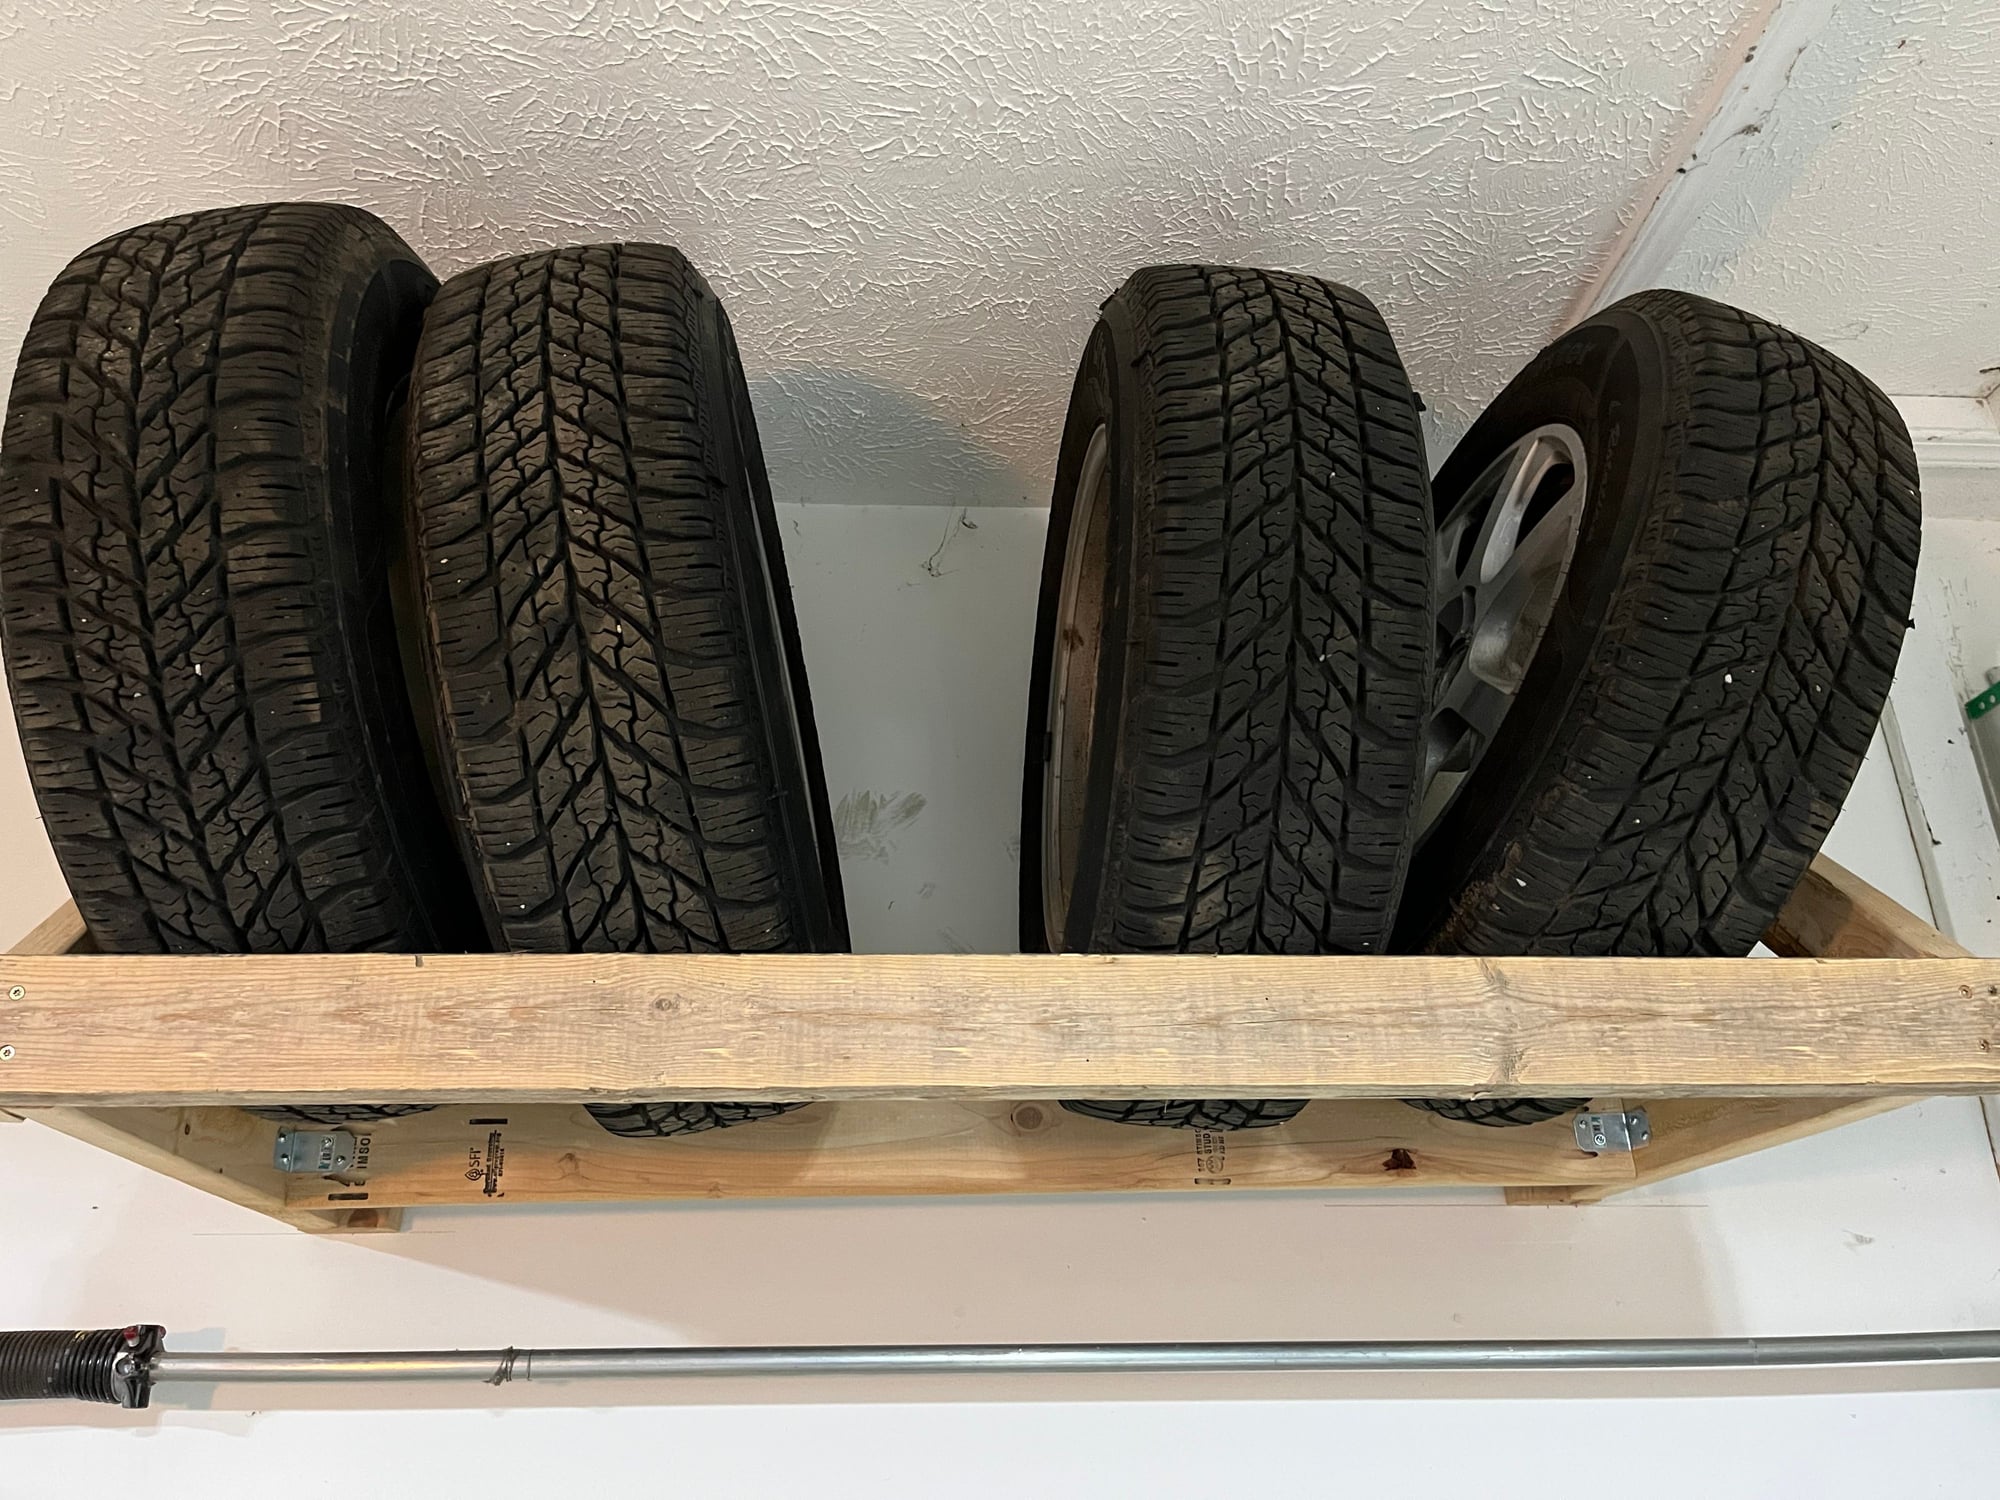 Wheels and Tires/Axles - Audi Q5 Winter wheel/tire set up - Used - 2011 to 2018 Audi Q5 - East Lansing, MI 48823, United States